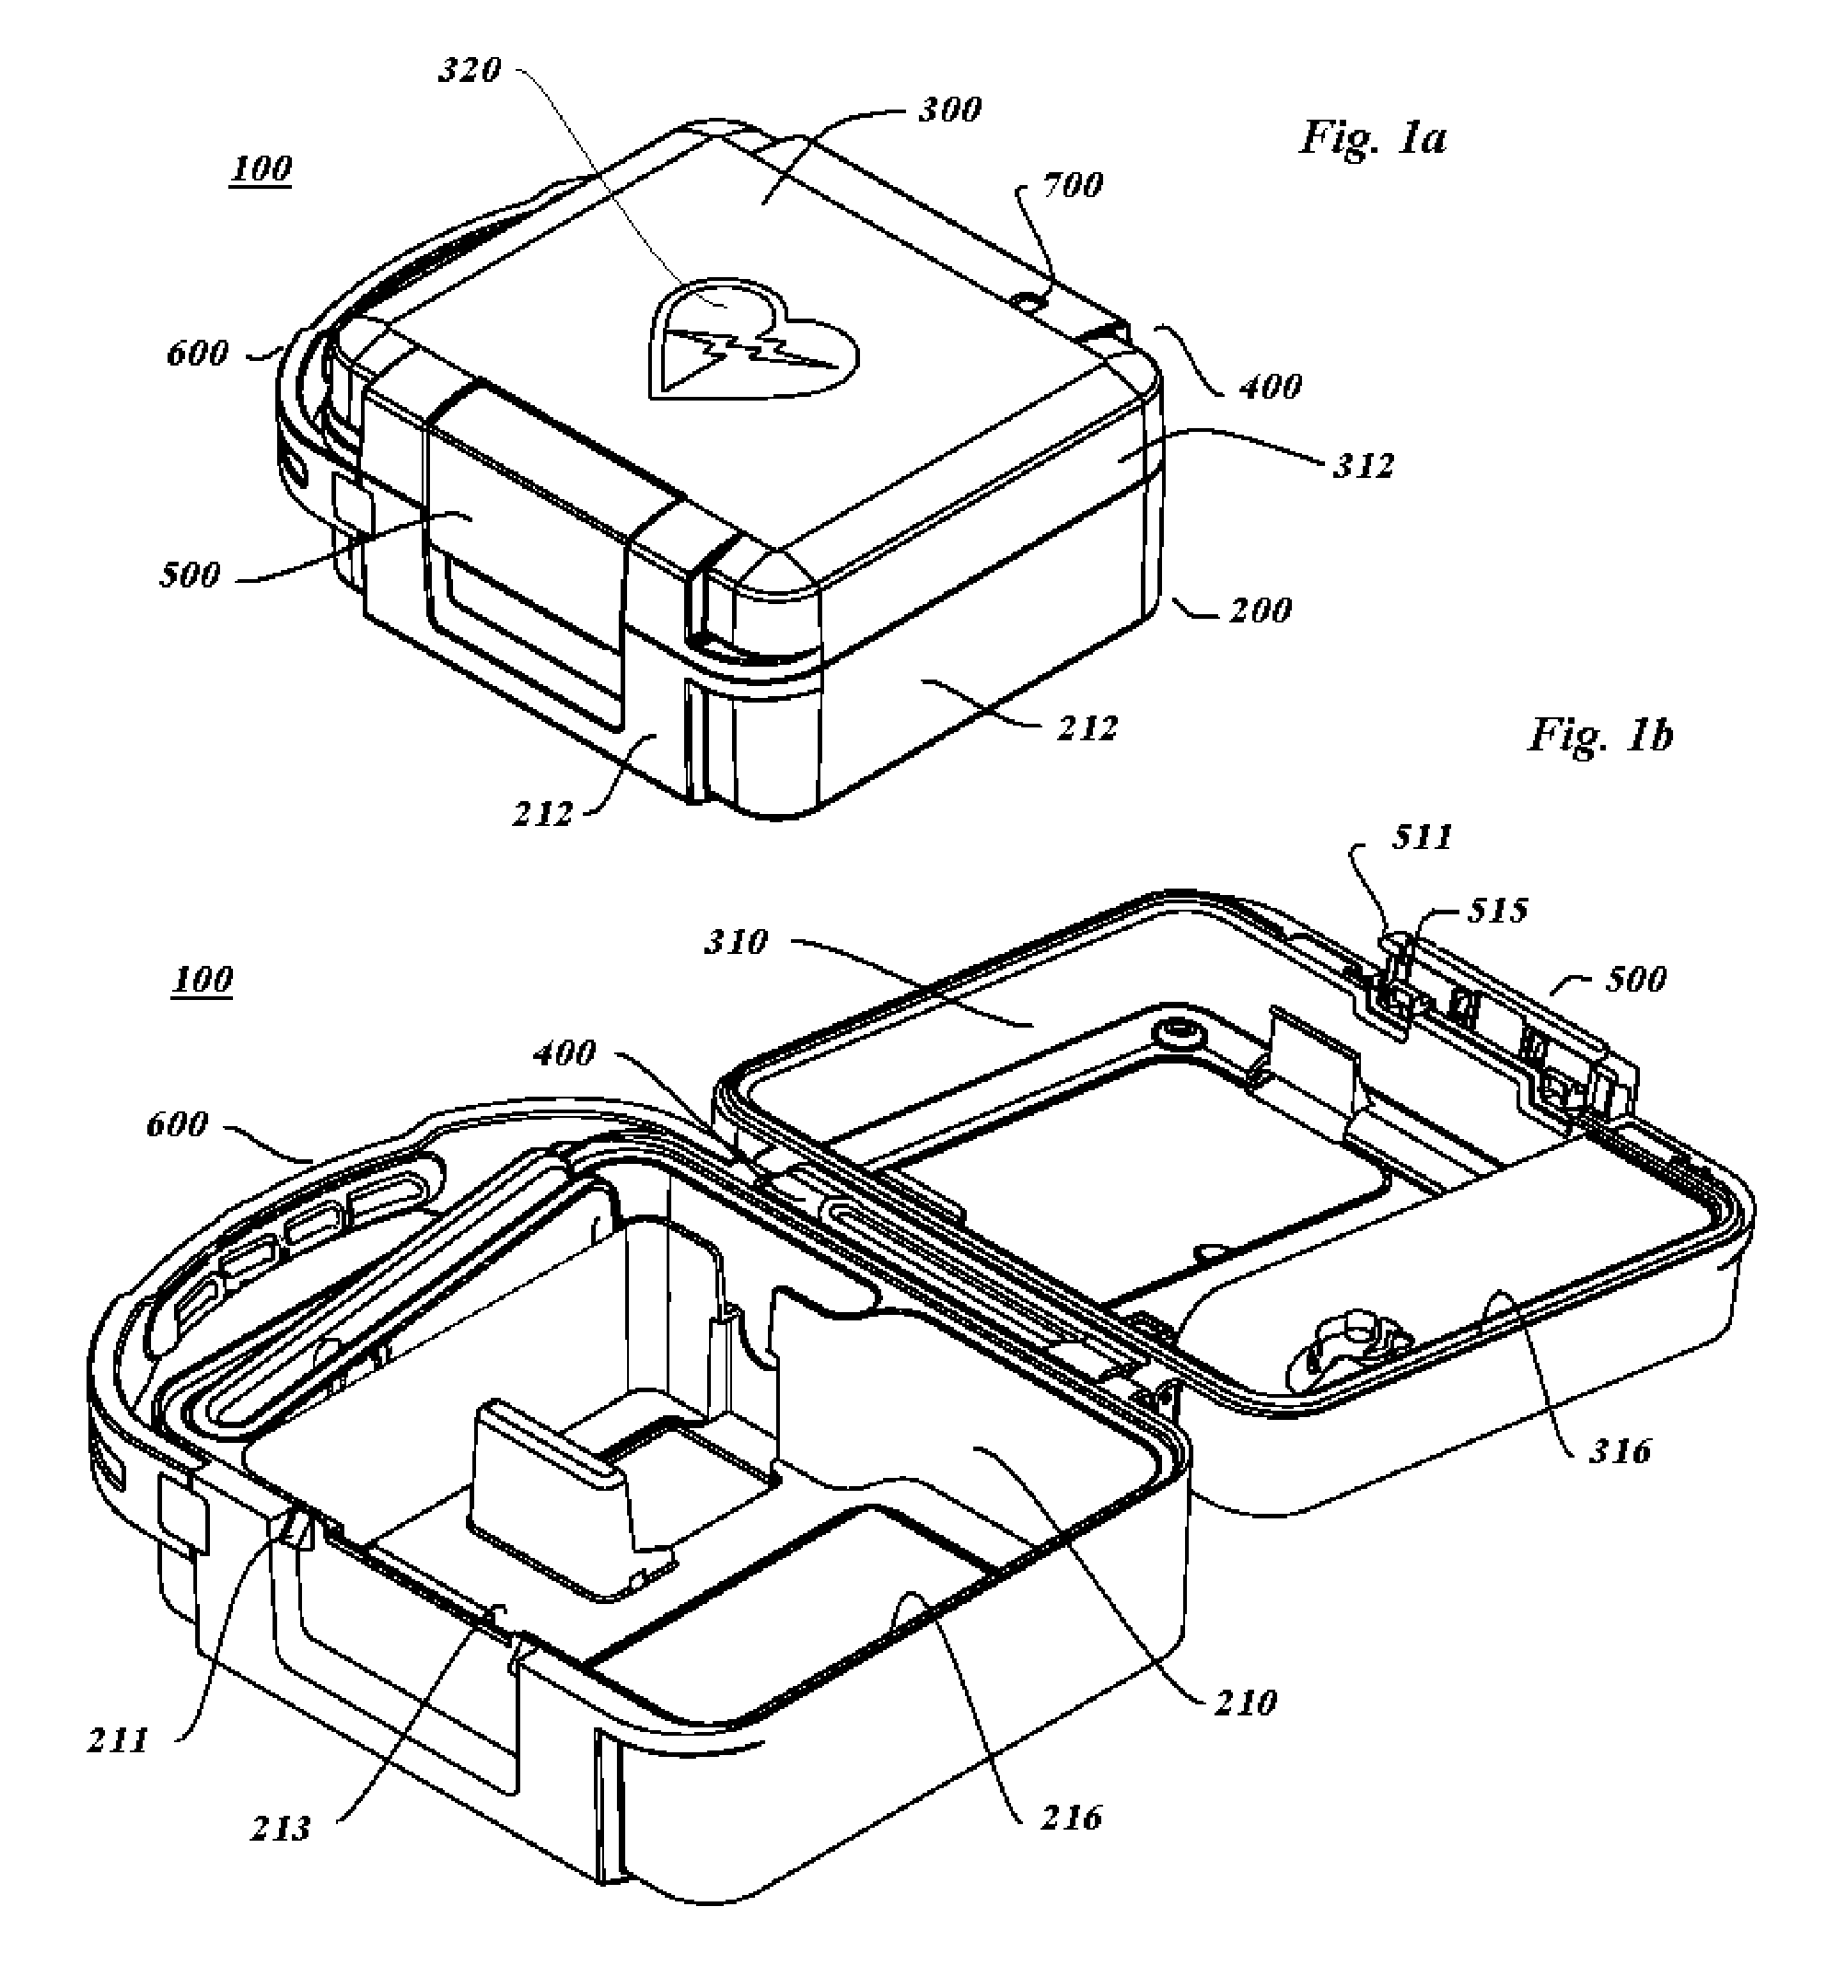 Carrying case for defibrillator with improved latch